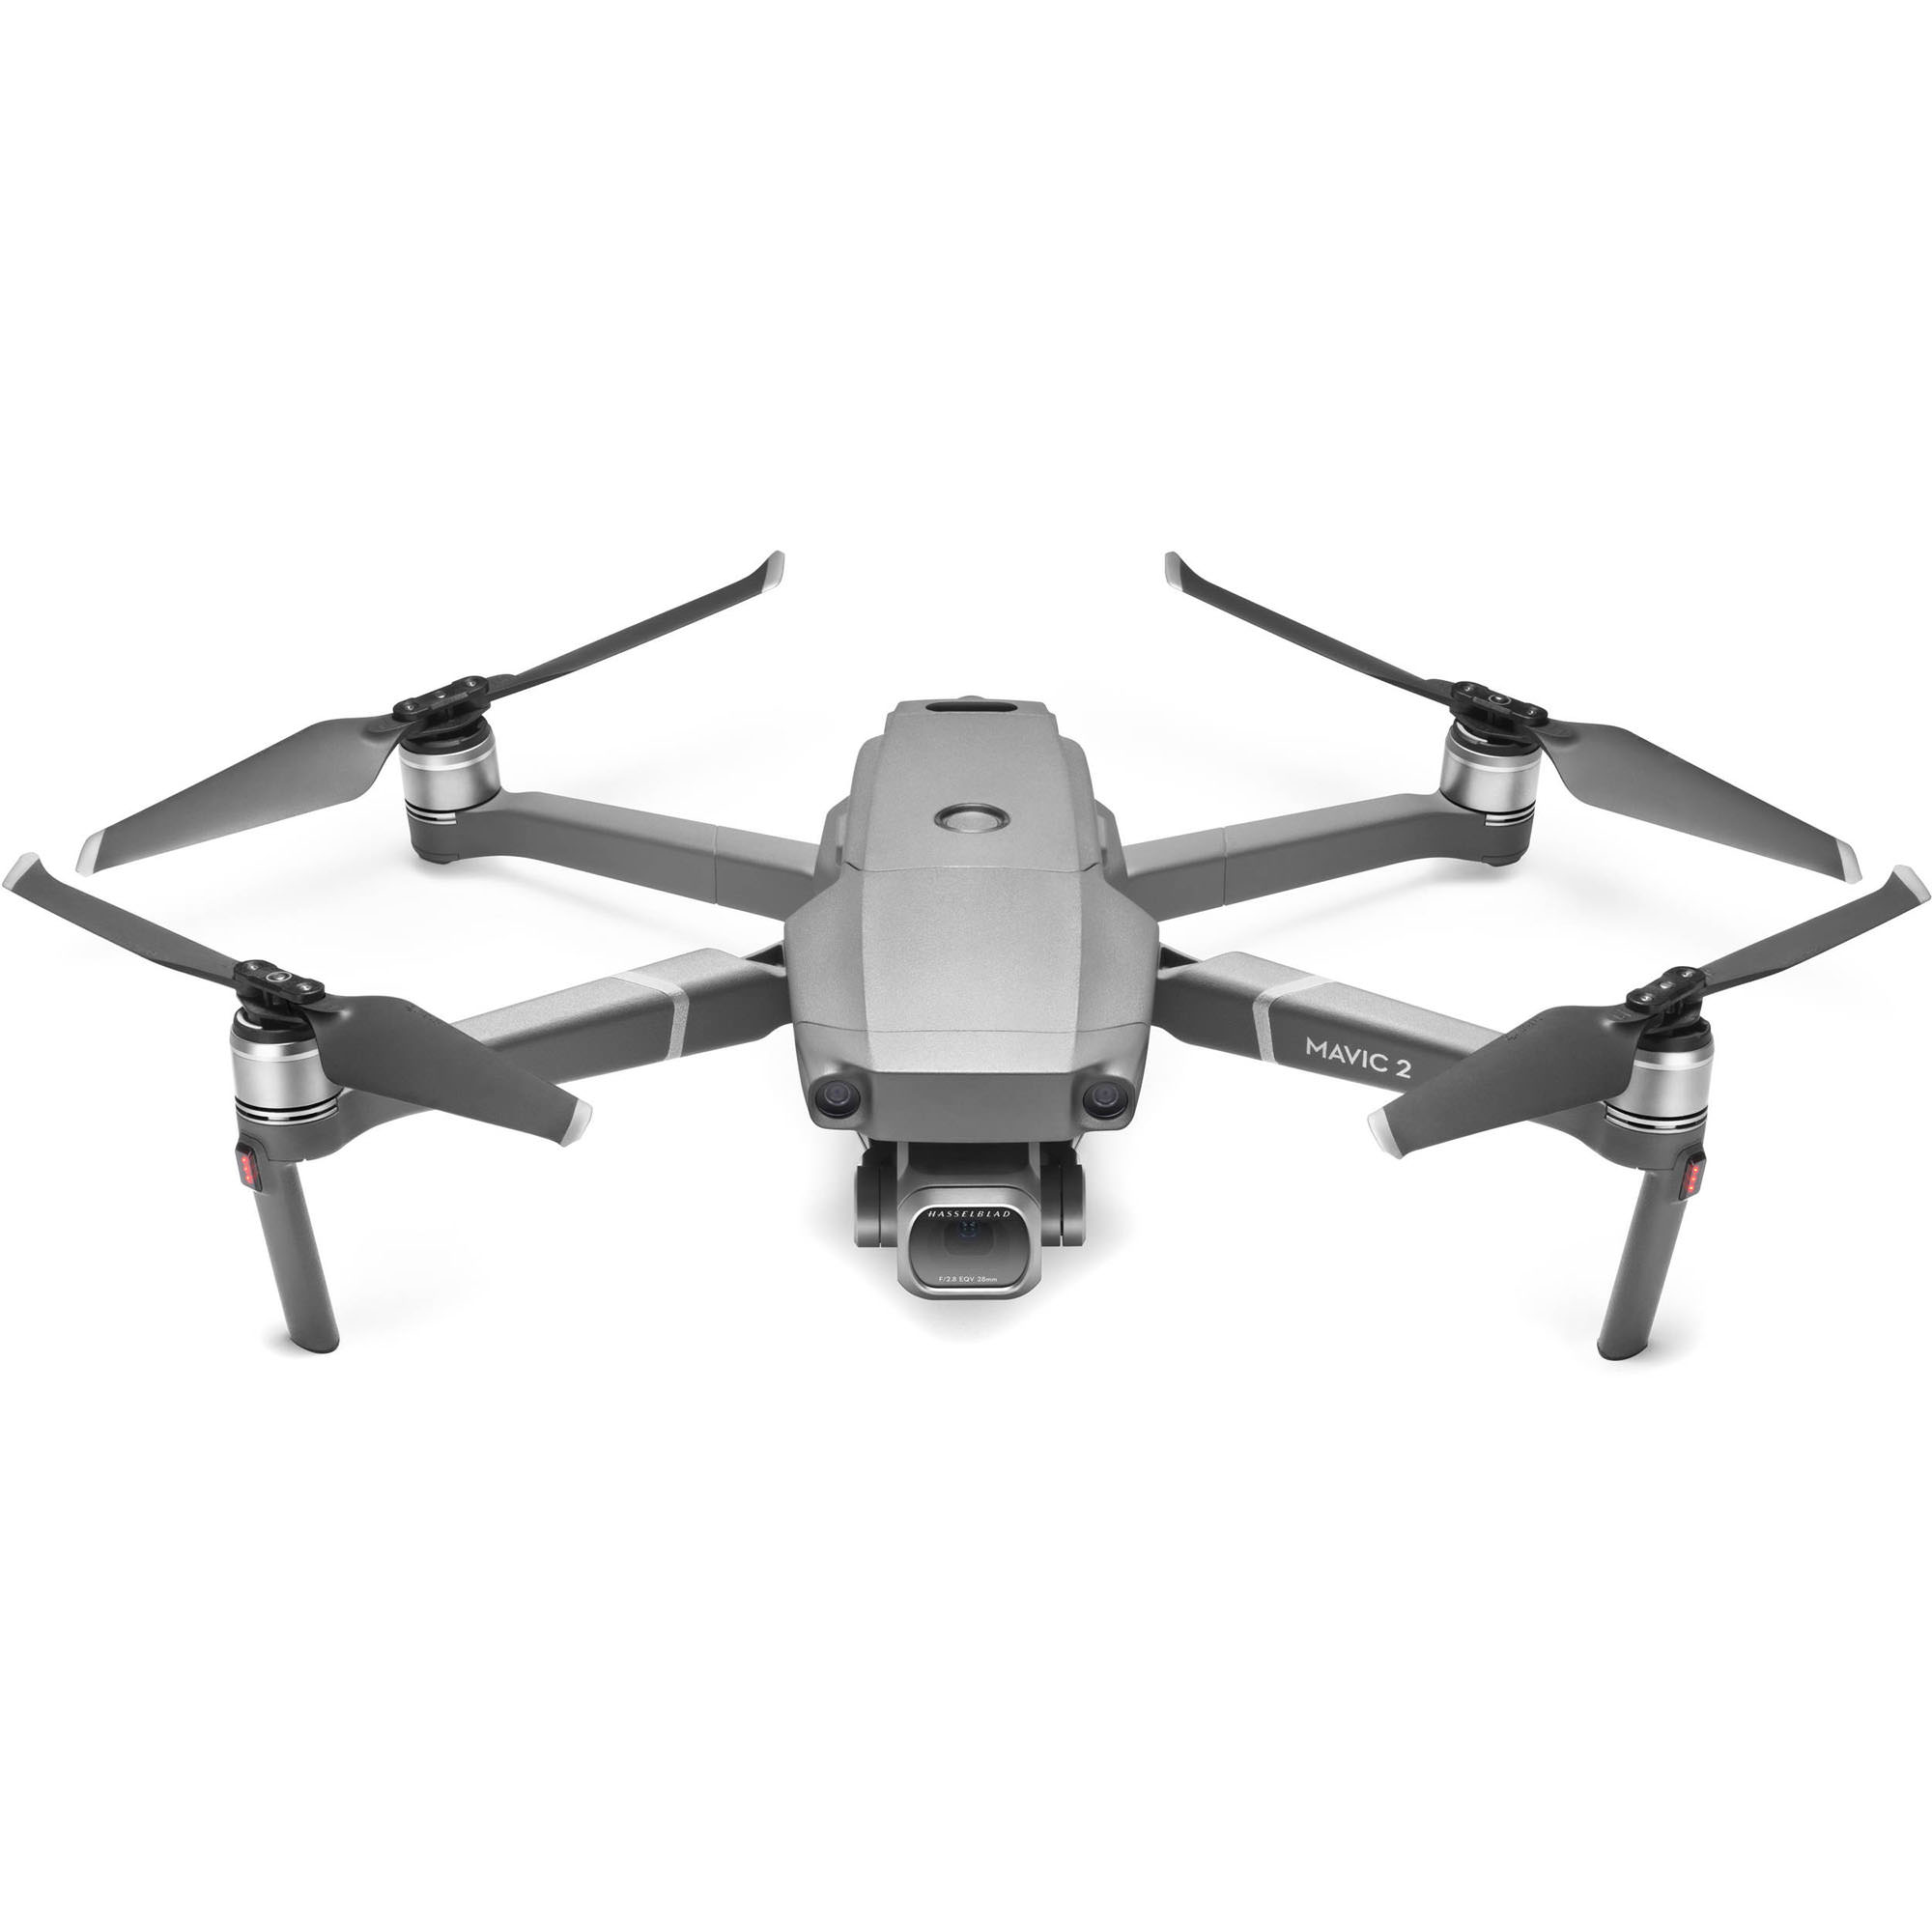 Are Walmart drones any good?